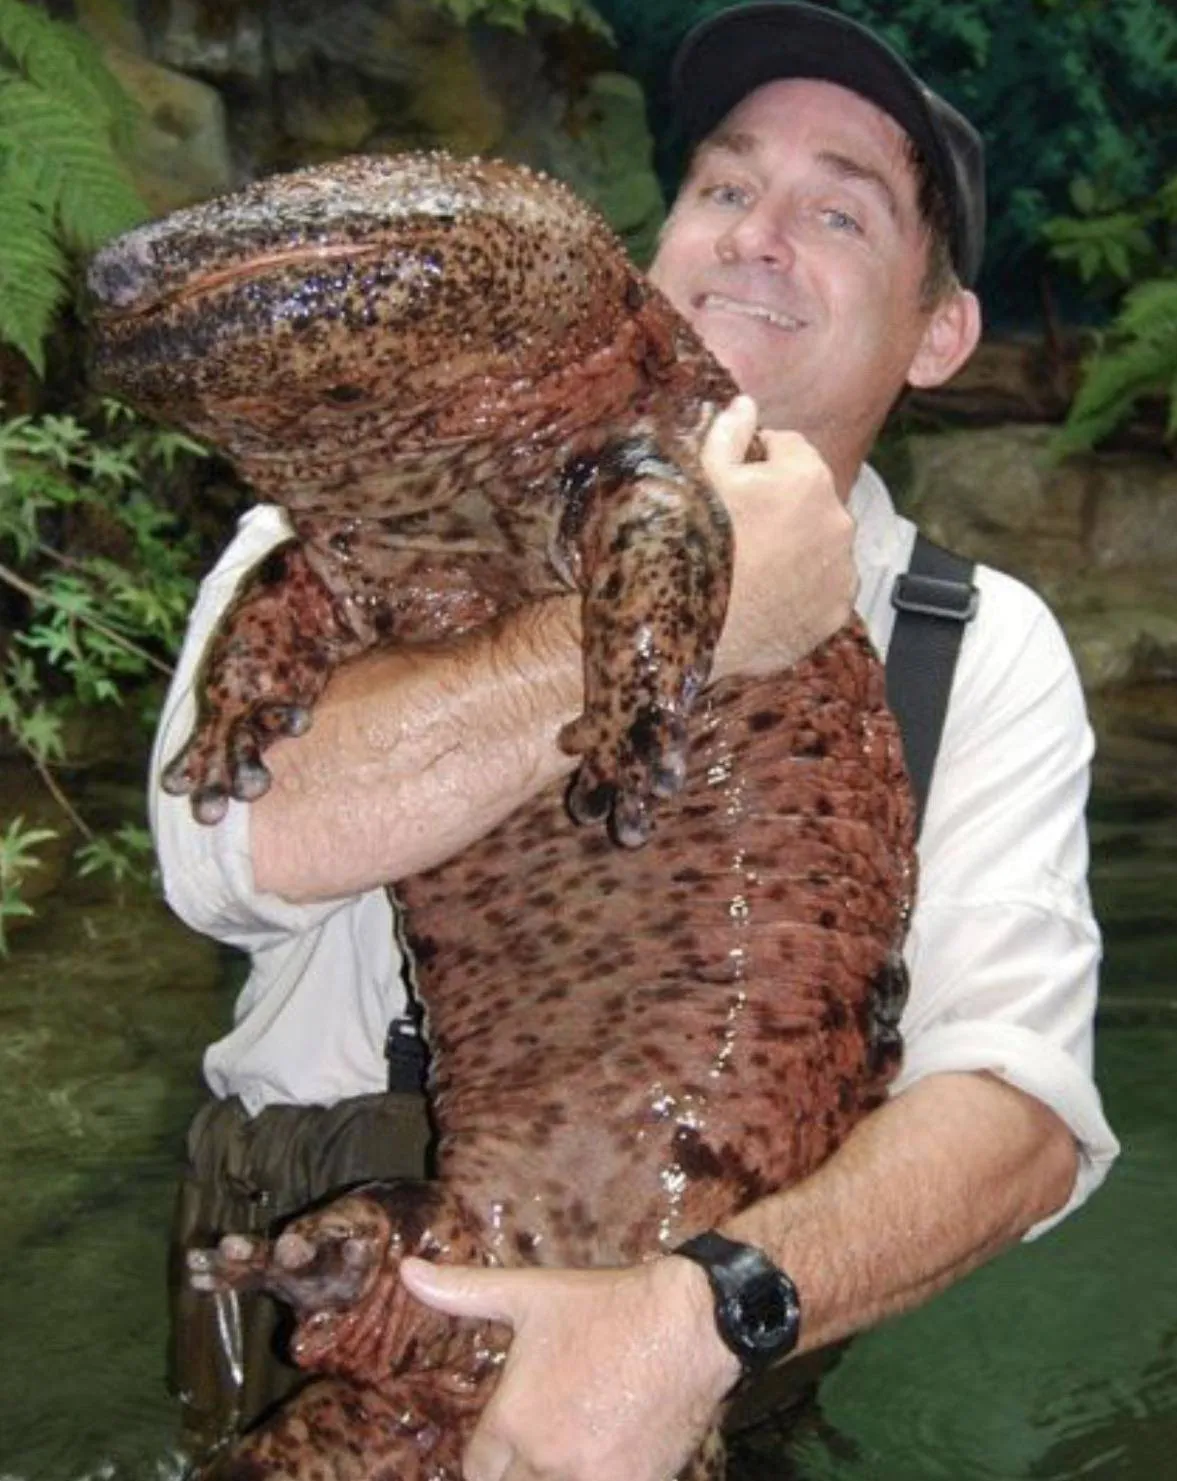 man holding salamander at least half the size of his body